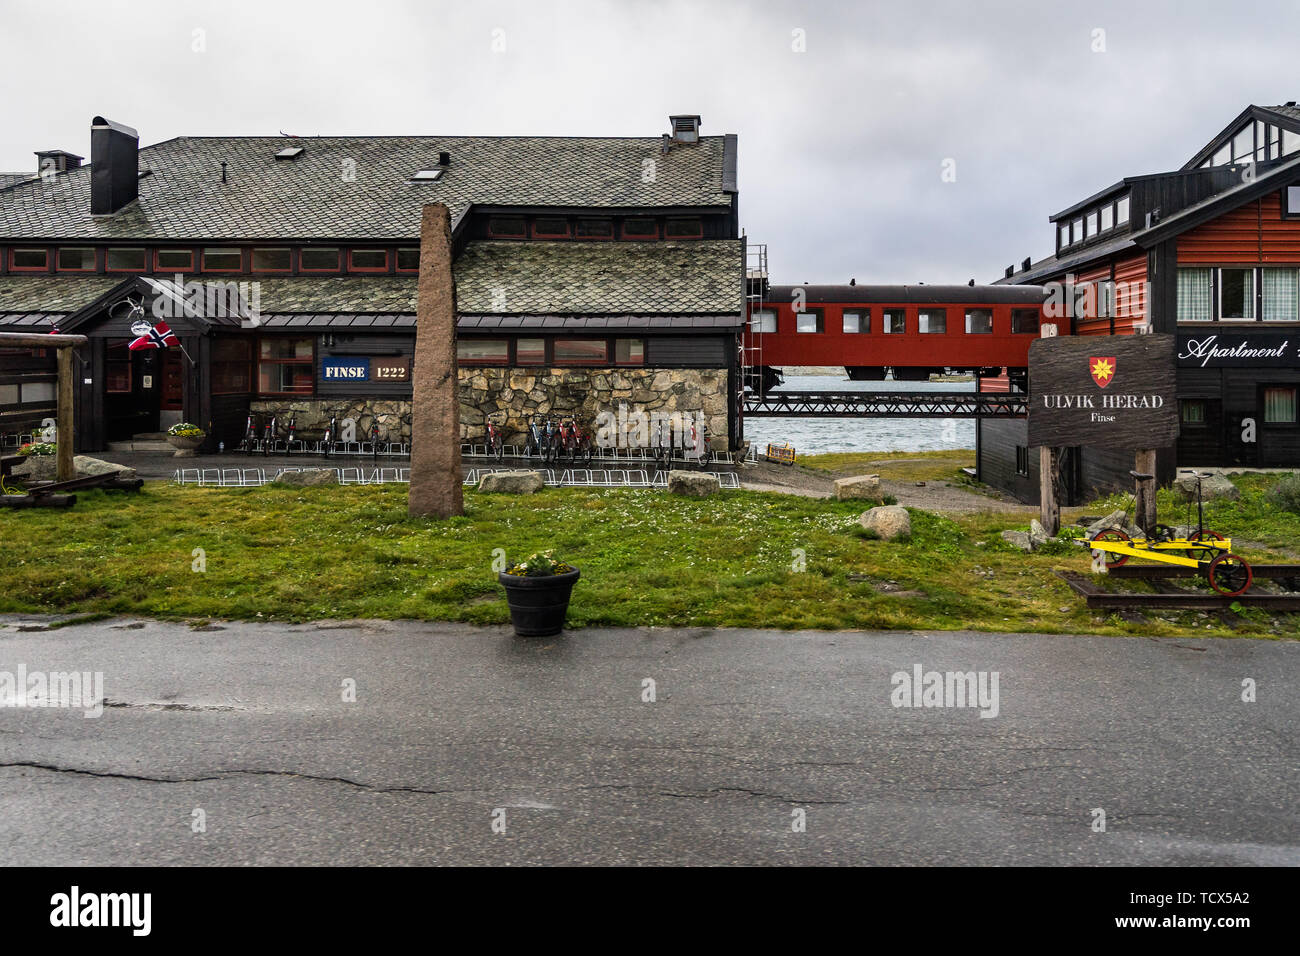 Finse1222 hotel located on the highest point of the Oslo-Bergen railway. Finse, Hordaland, Norway, August 2018 Stock Photo